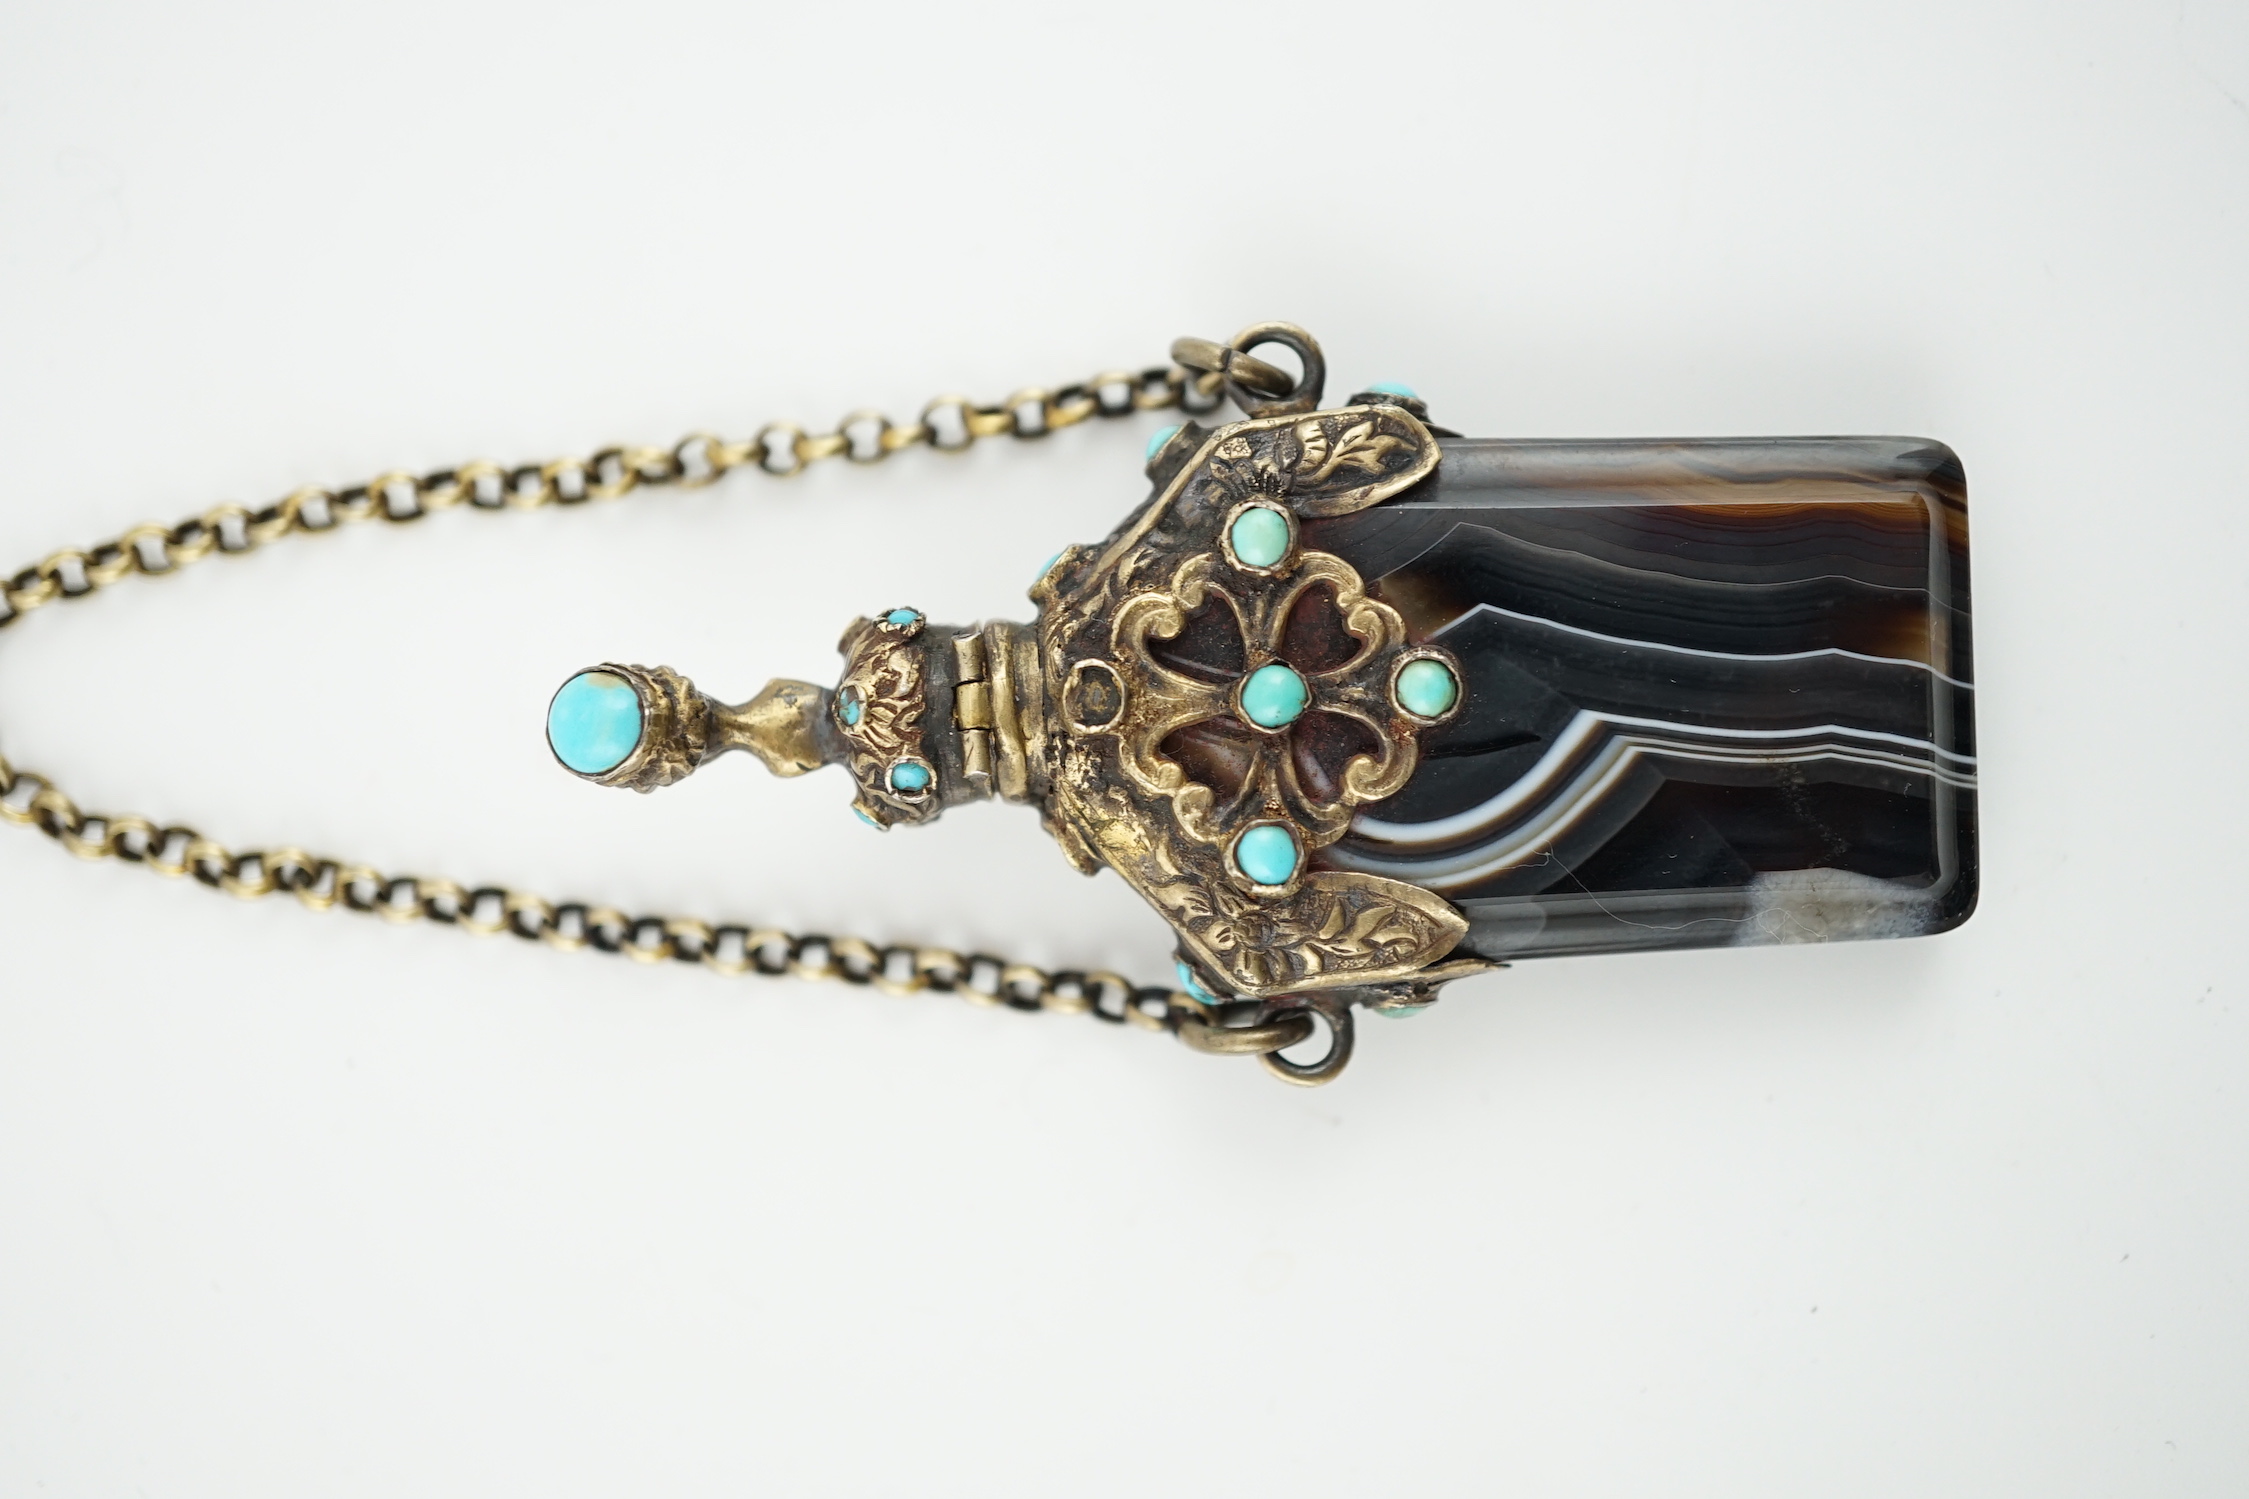 A 19th century continental gilt metal and turquoise cabochon set banded agate scent bottle